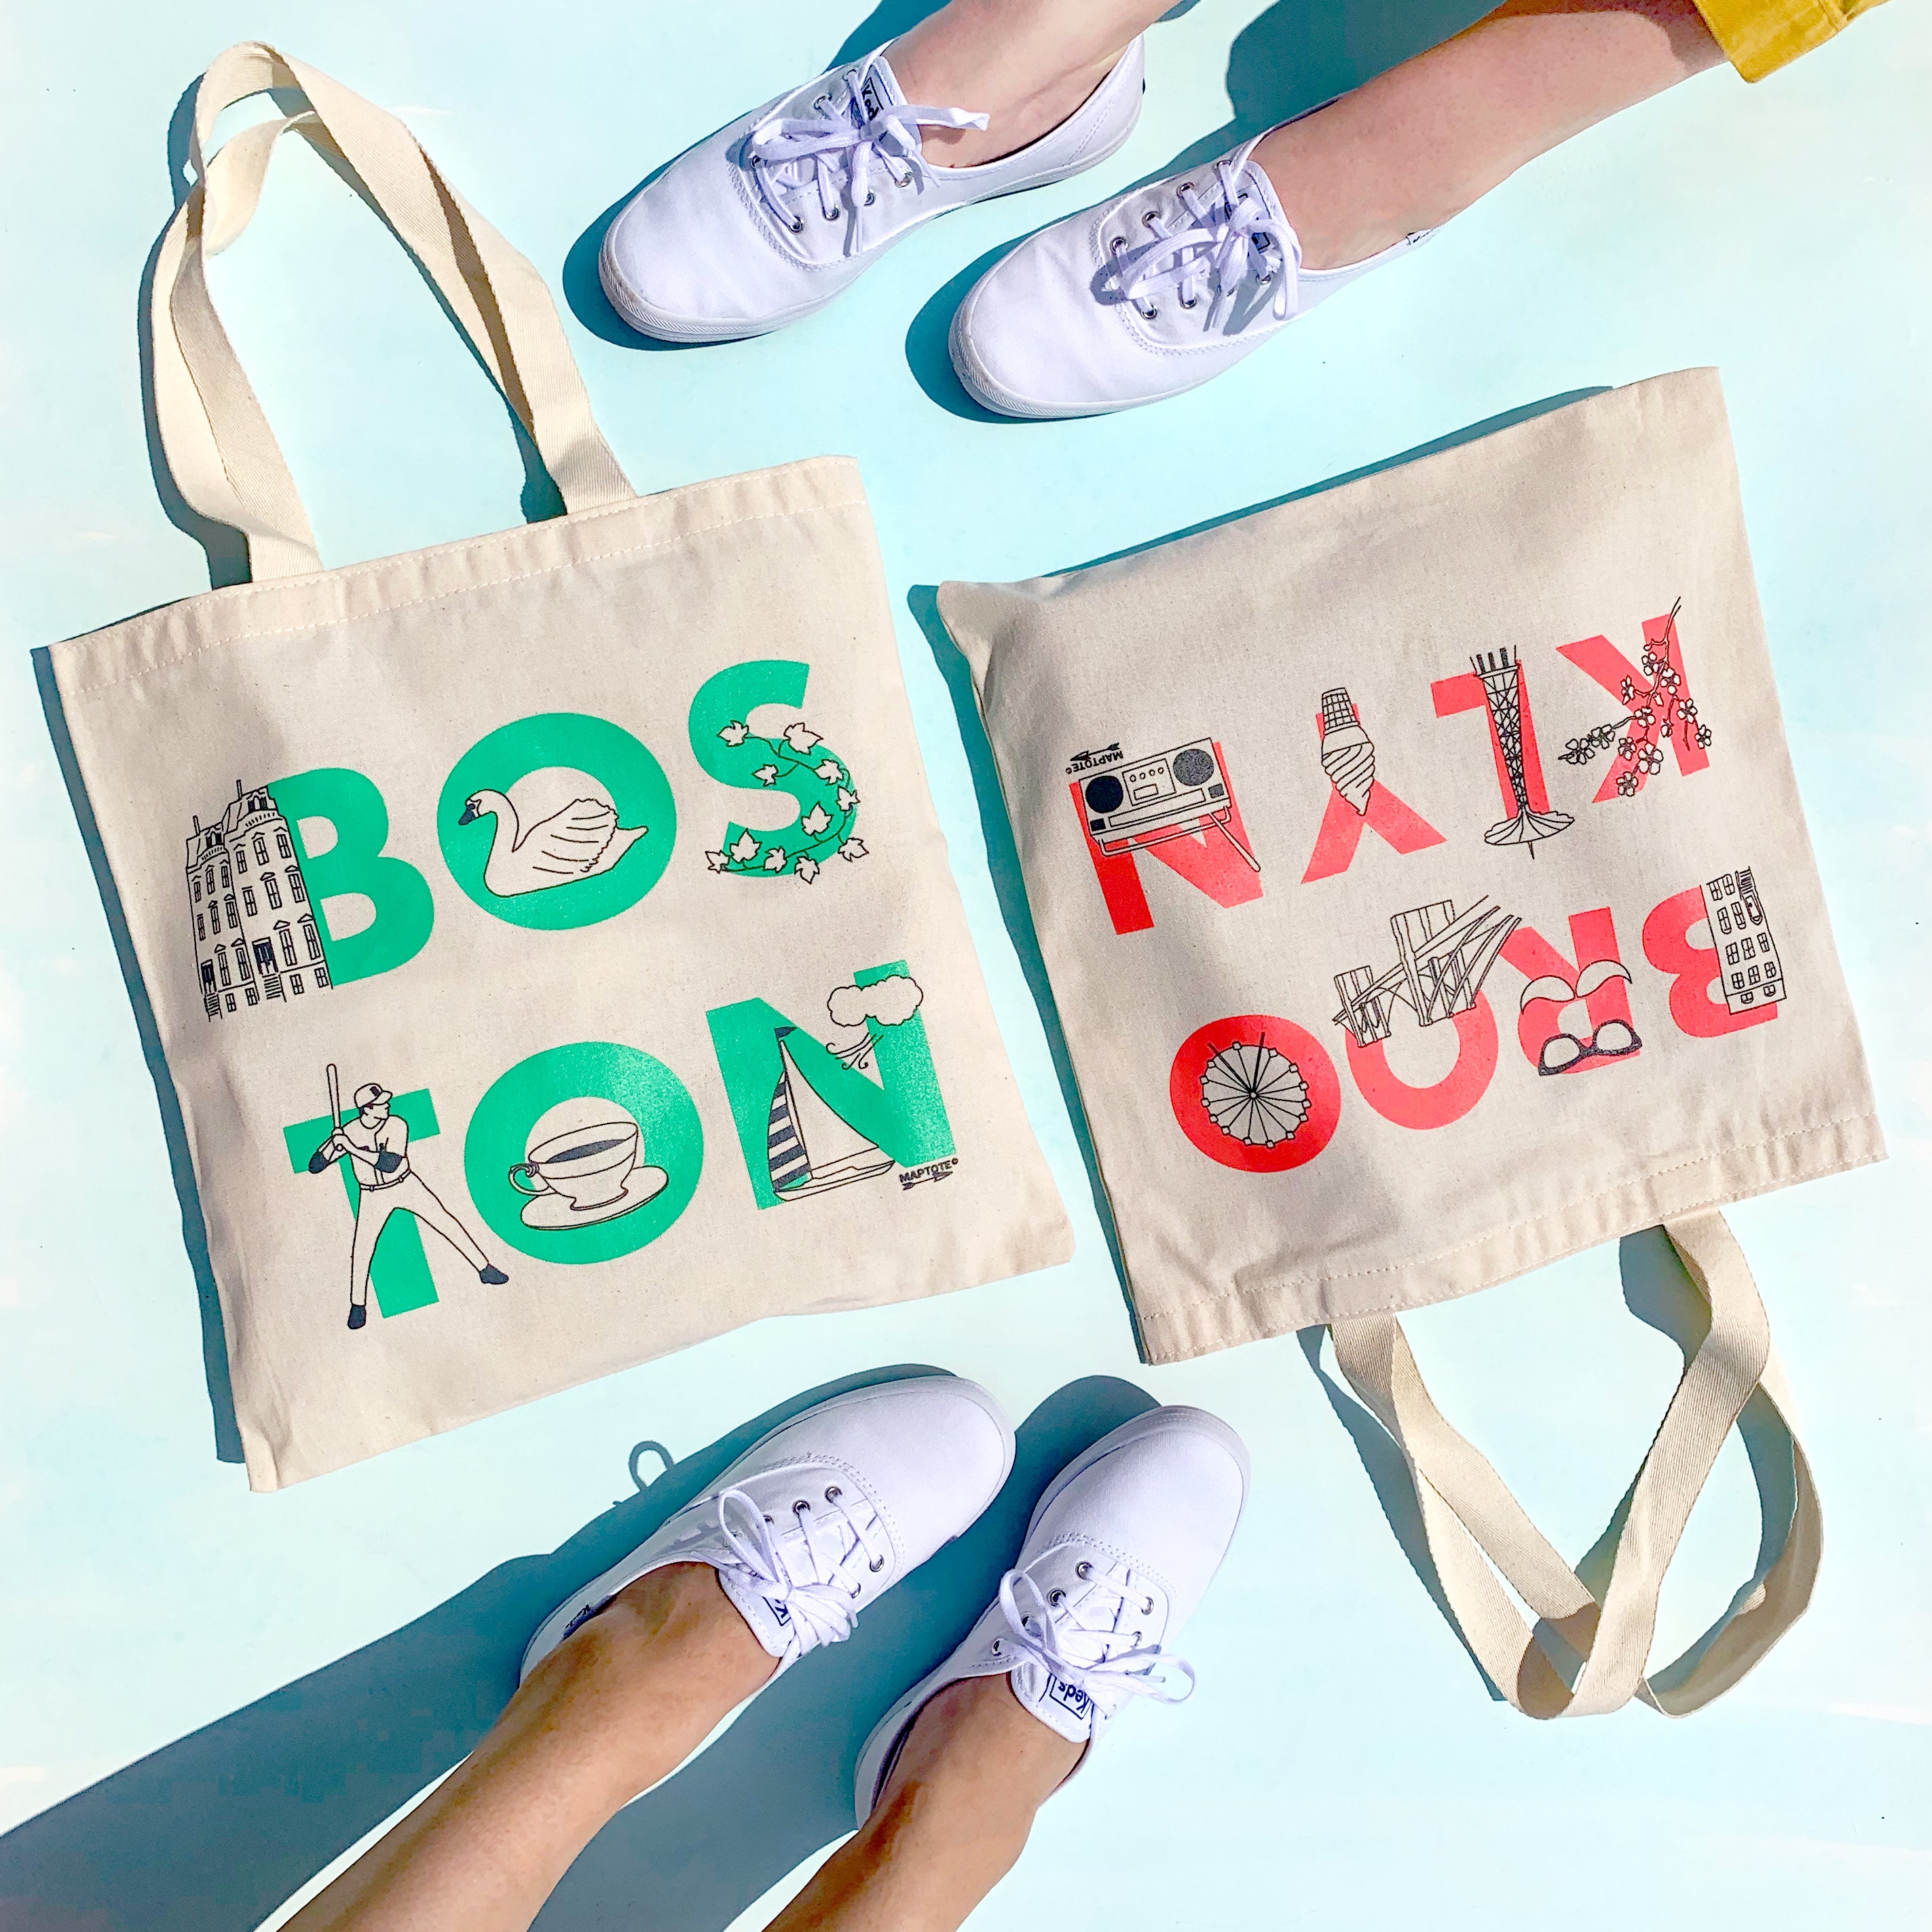 New! Font Totes Now Available